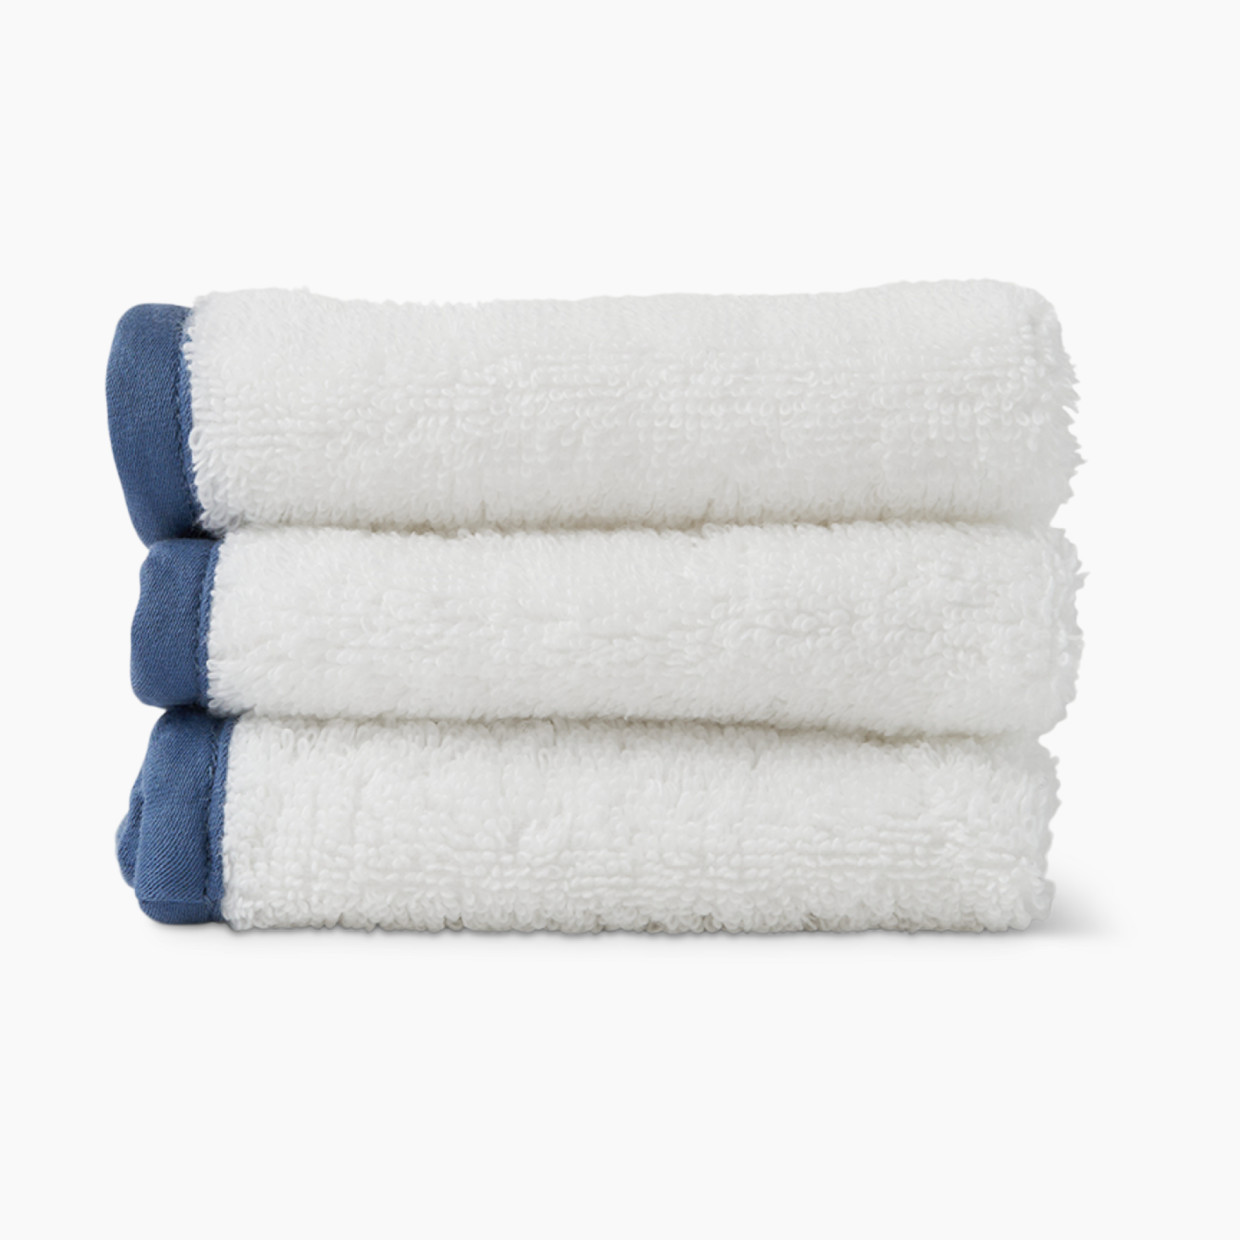 Lalo The Washcloth 3-Pack - Coconut / Blueberry.